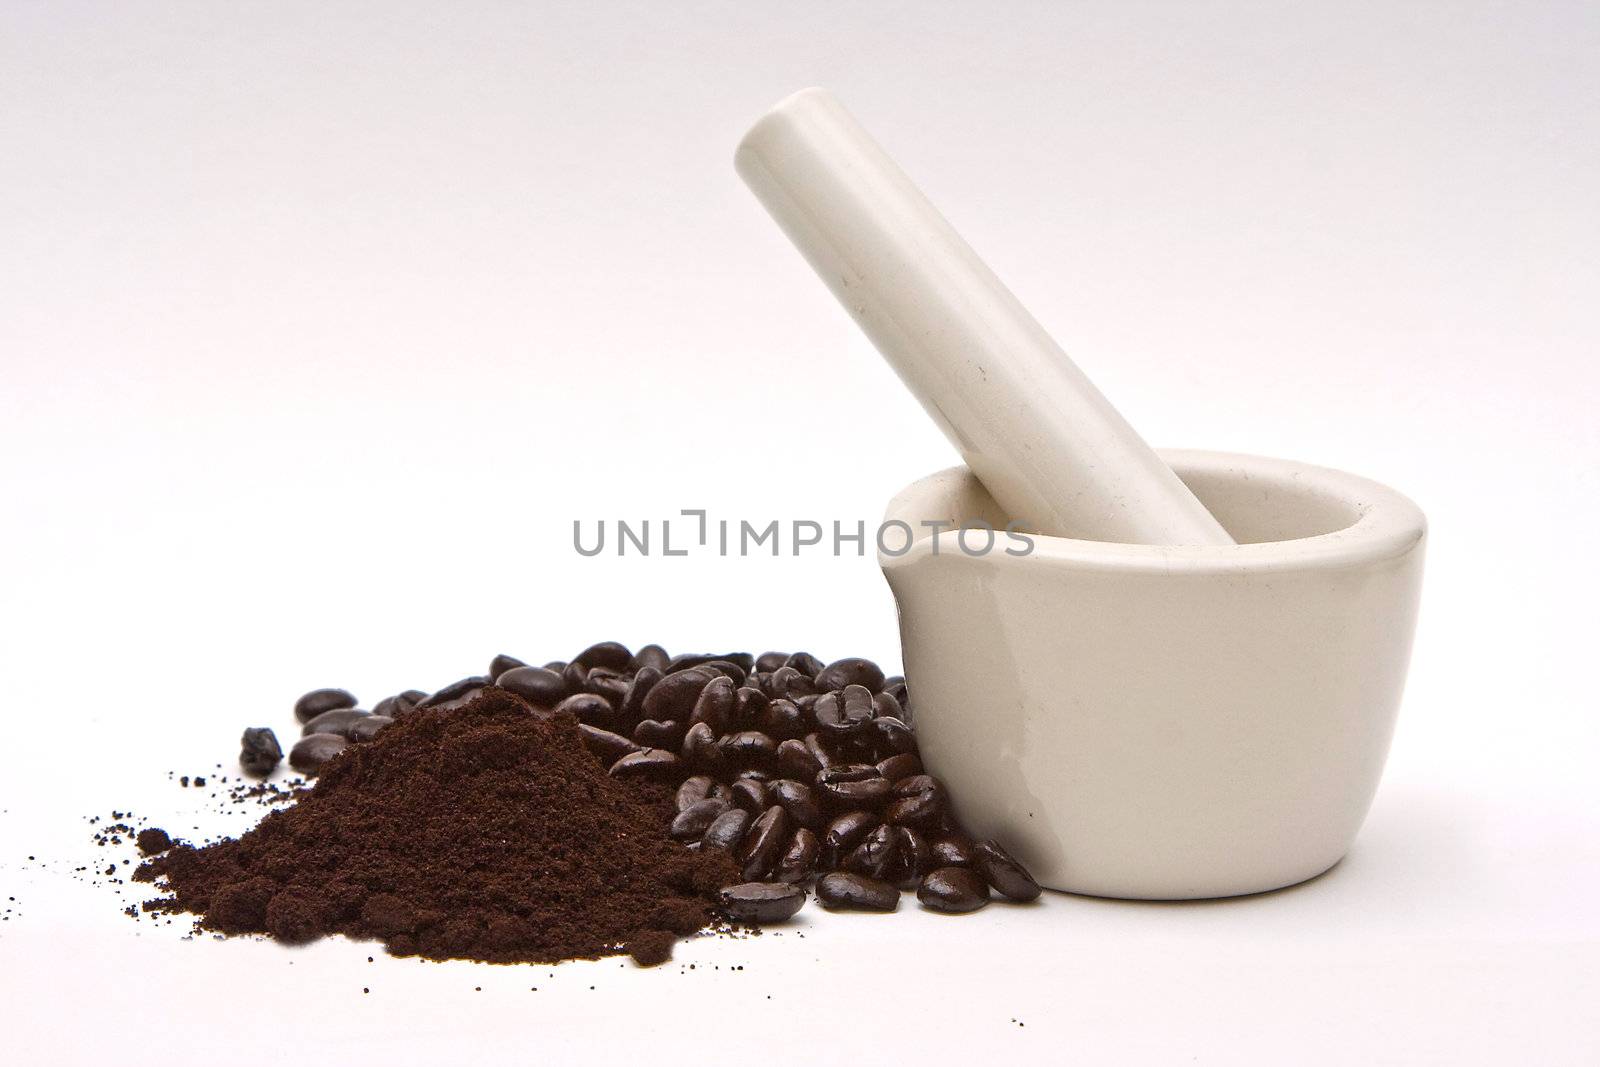 Mortar, coffee beans and grind by phakimata